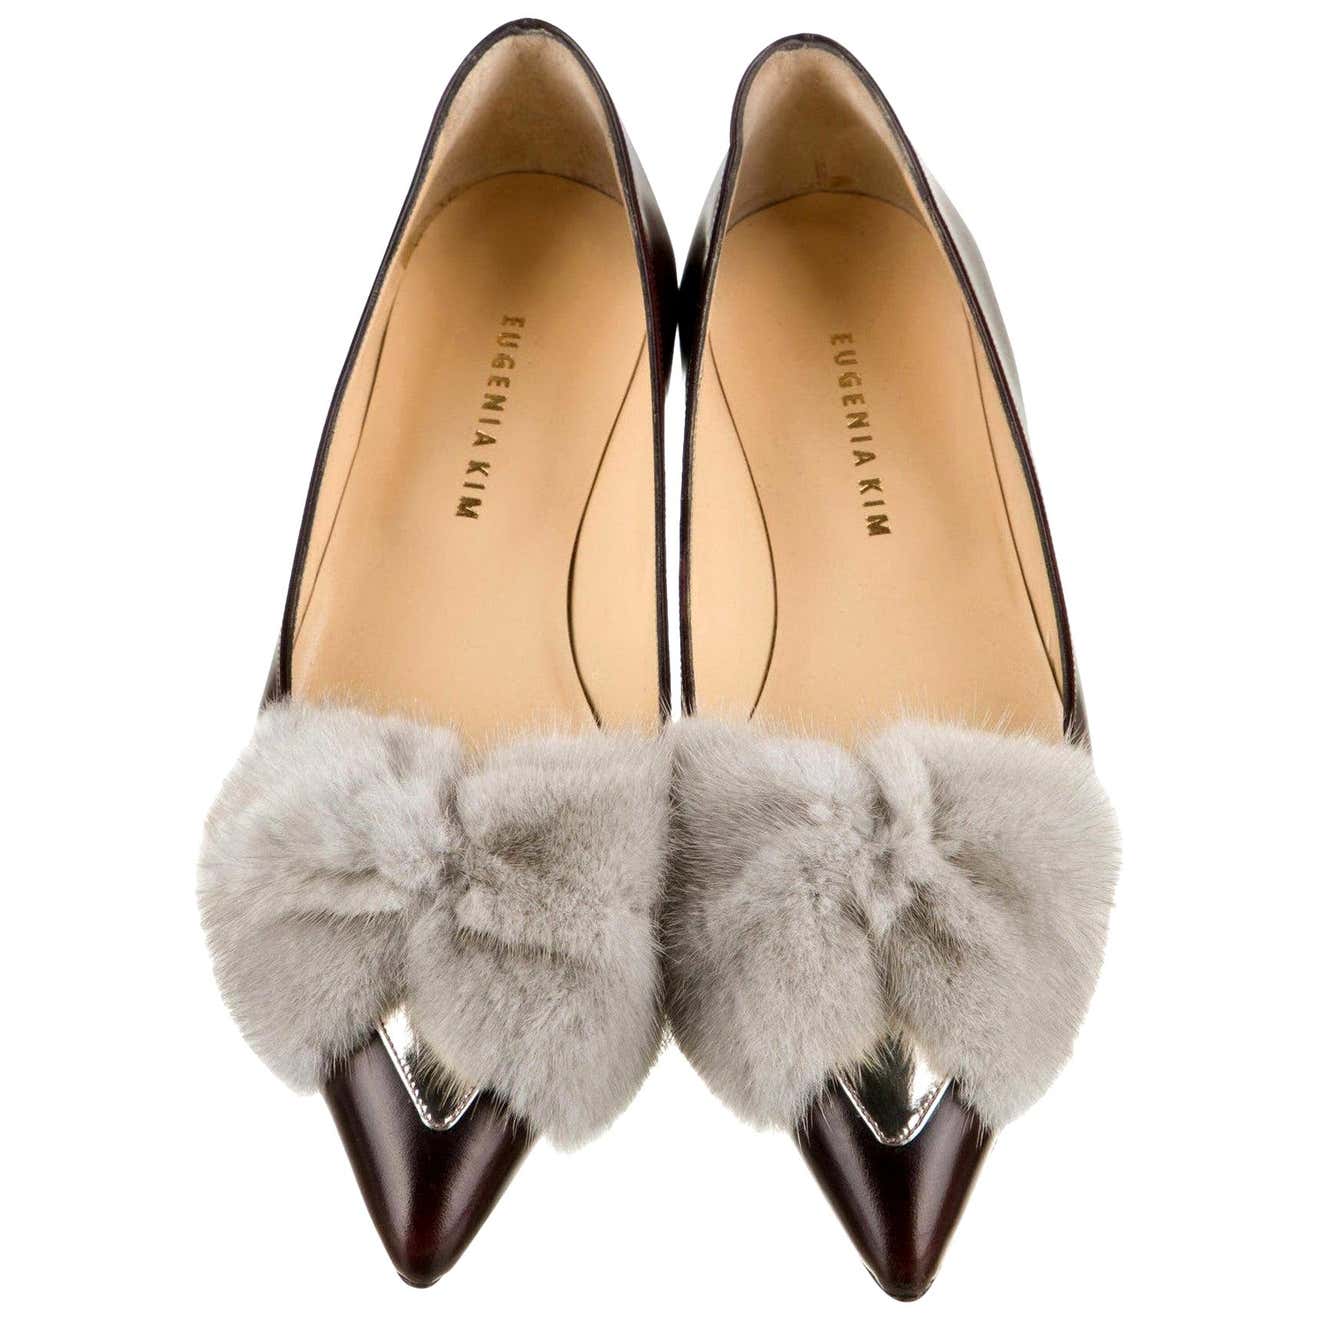 New Eugenia Kim Leather Mink Pointed Toe Flats Shoes Sz 39 U.S. 8.5 at ...